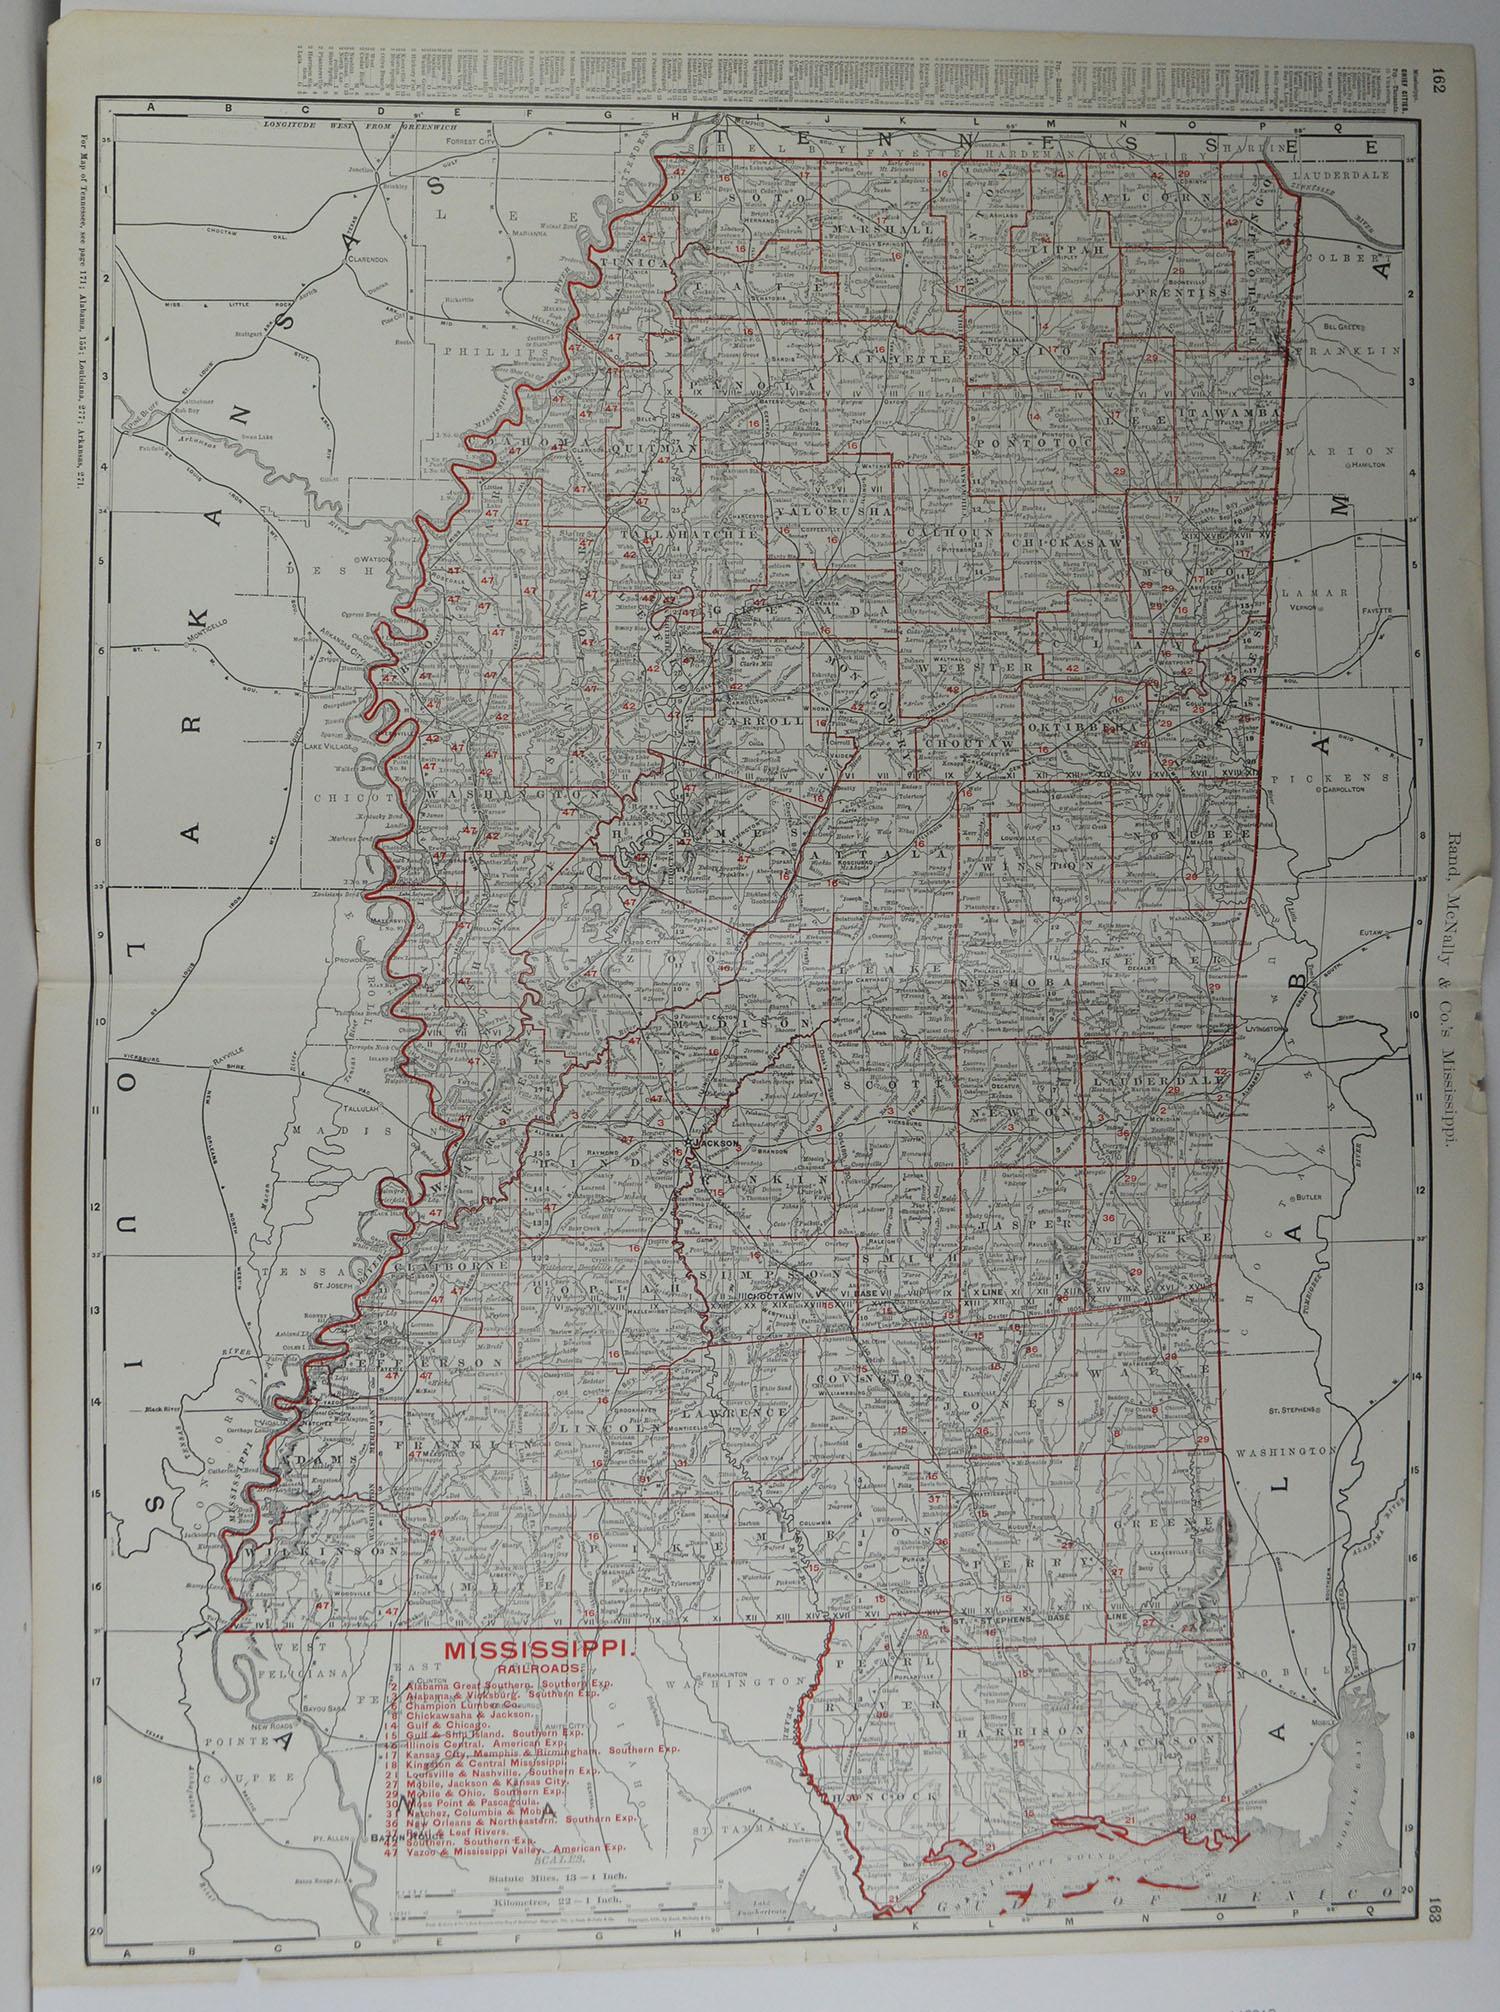 Fabulous monochrome map with red outline color 

Original color

By Rand, McNally & Co.

Published, circa 1900

Unframed

Repairs to minor edge tears.